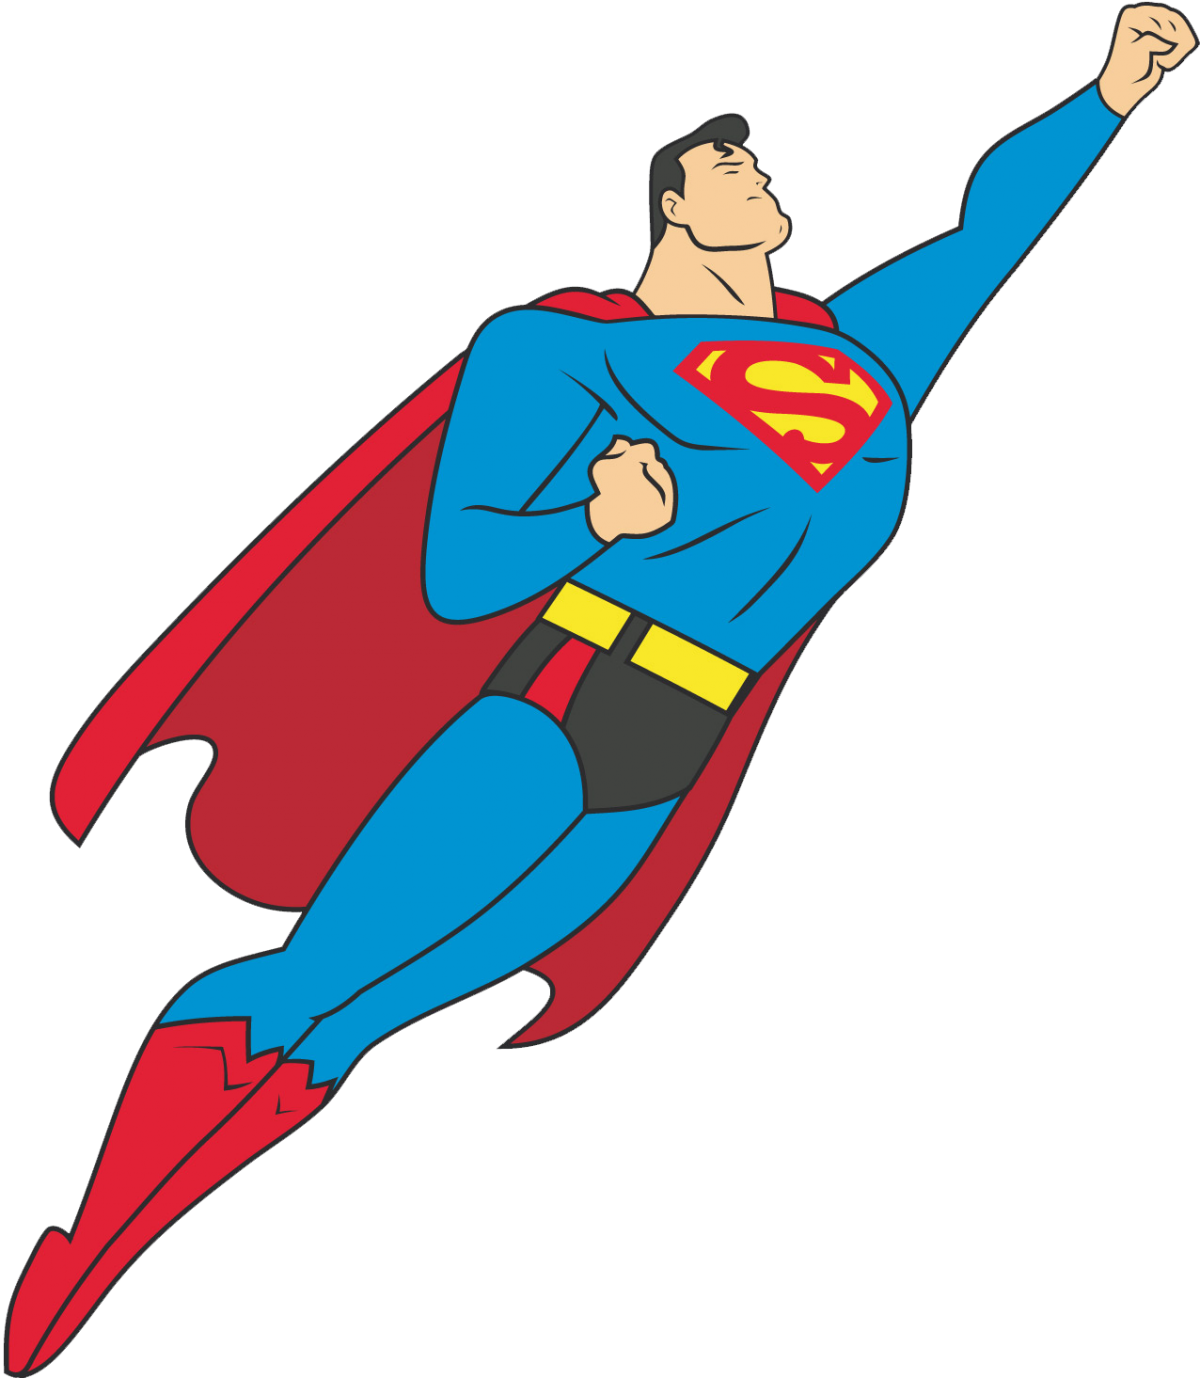 superman-black-and-white-Download-superman-cartoon-vector-in-eps-format